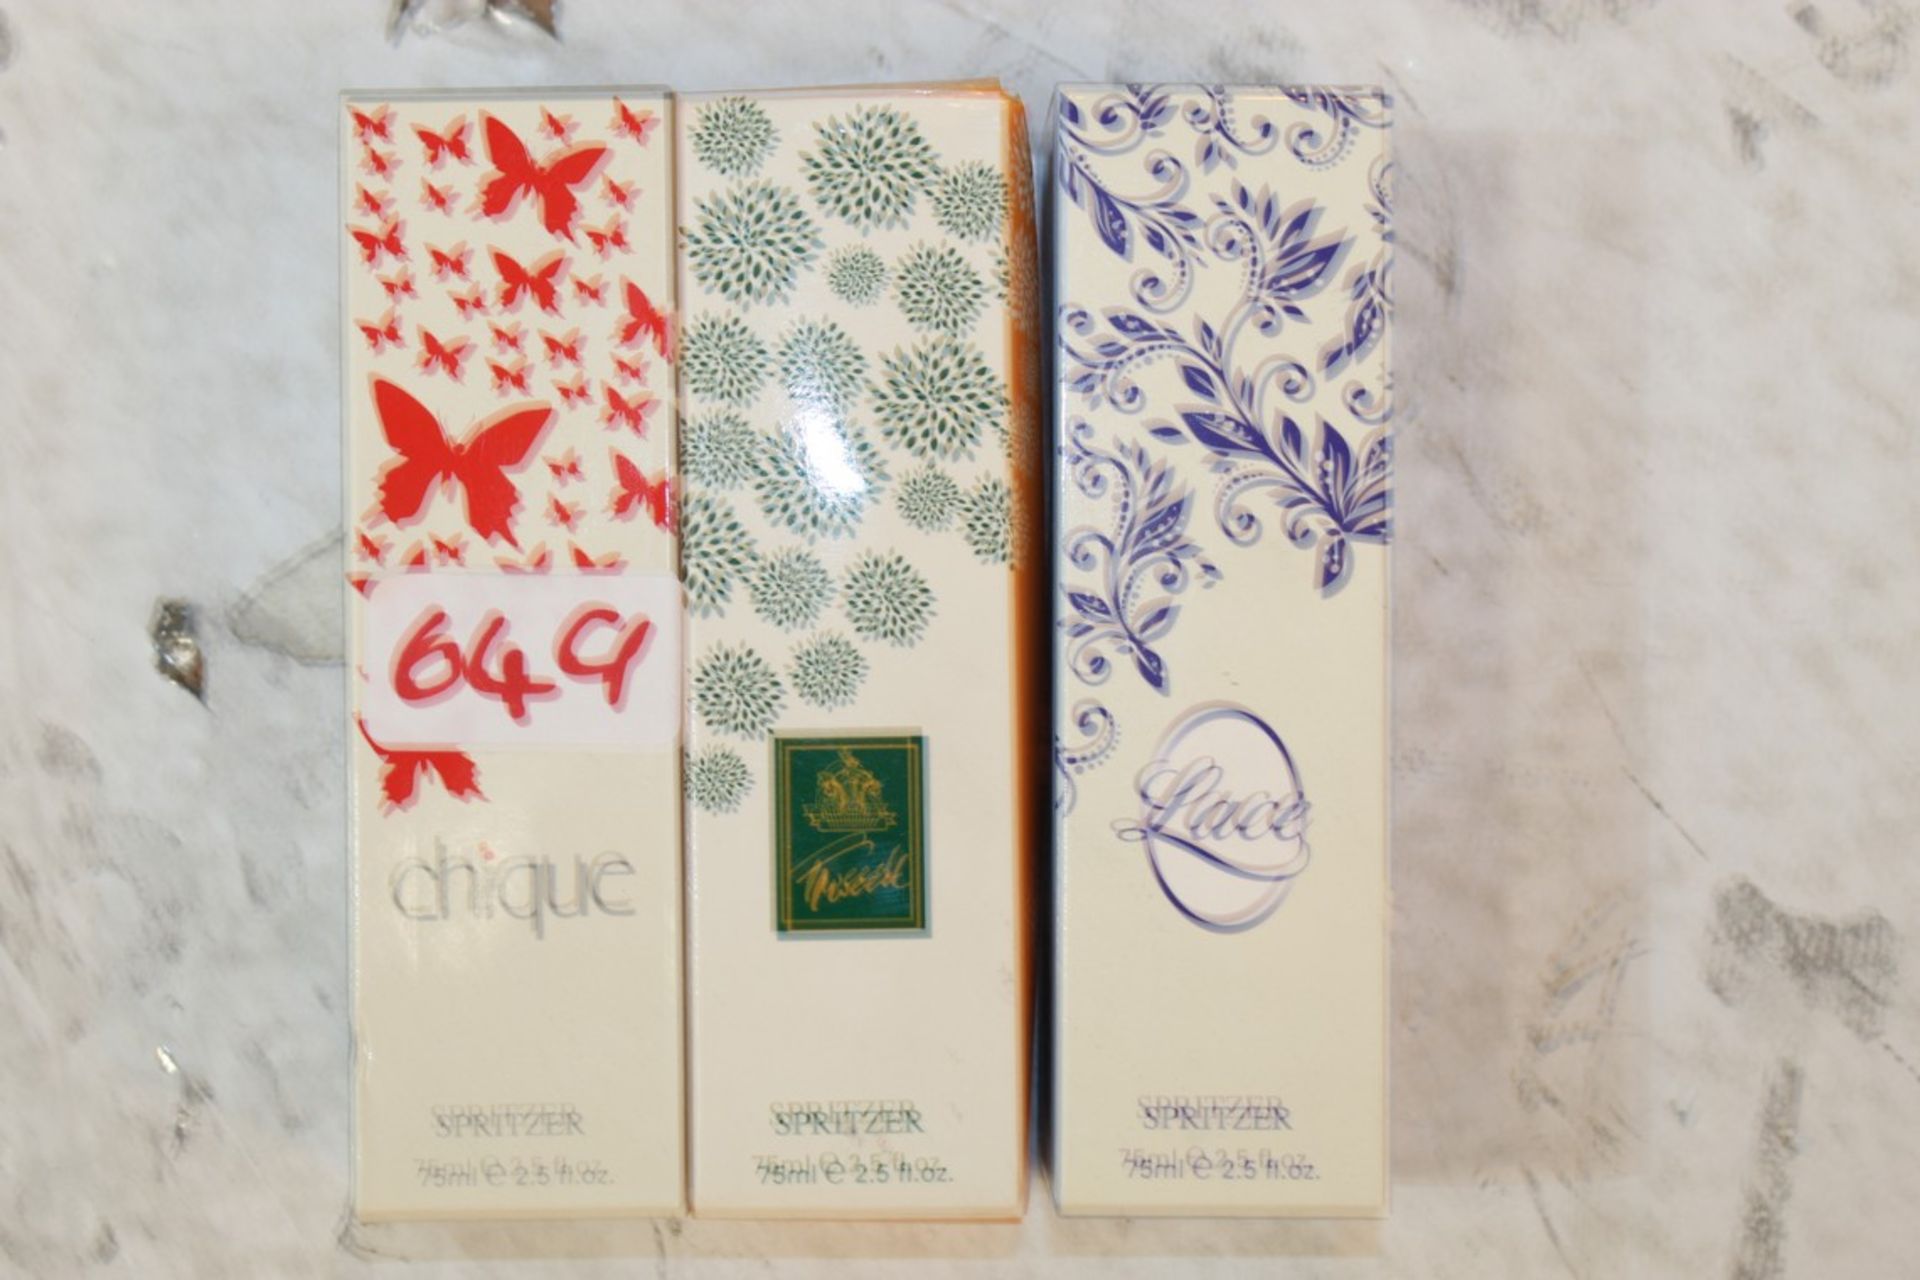 Lot to Contain 4 Boxed Assorted Perfume Sprays by Chique, Lace and Tweed Combined RRP £40 (